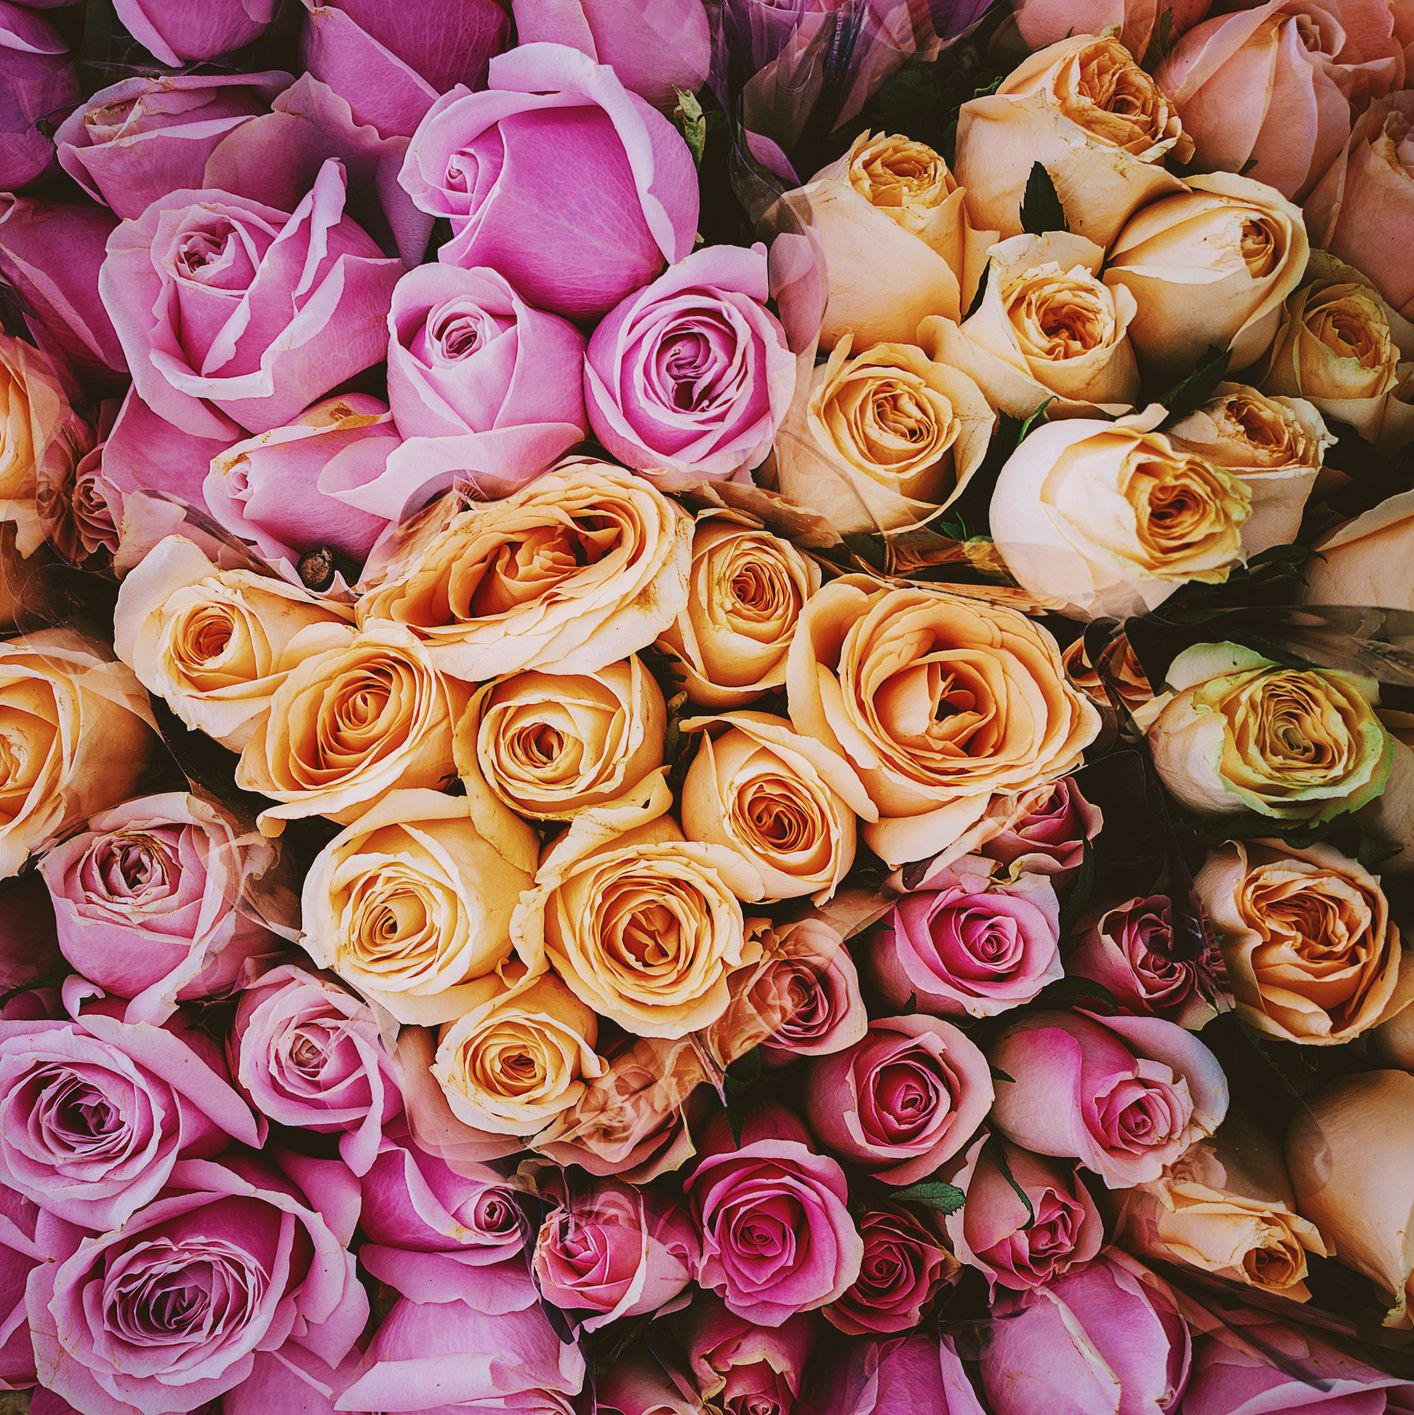 Rose Color Meanings to Know Before Sending a Bouquet